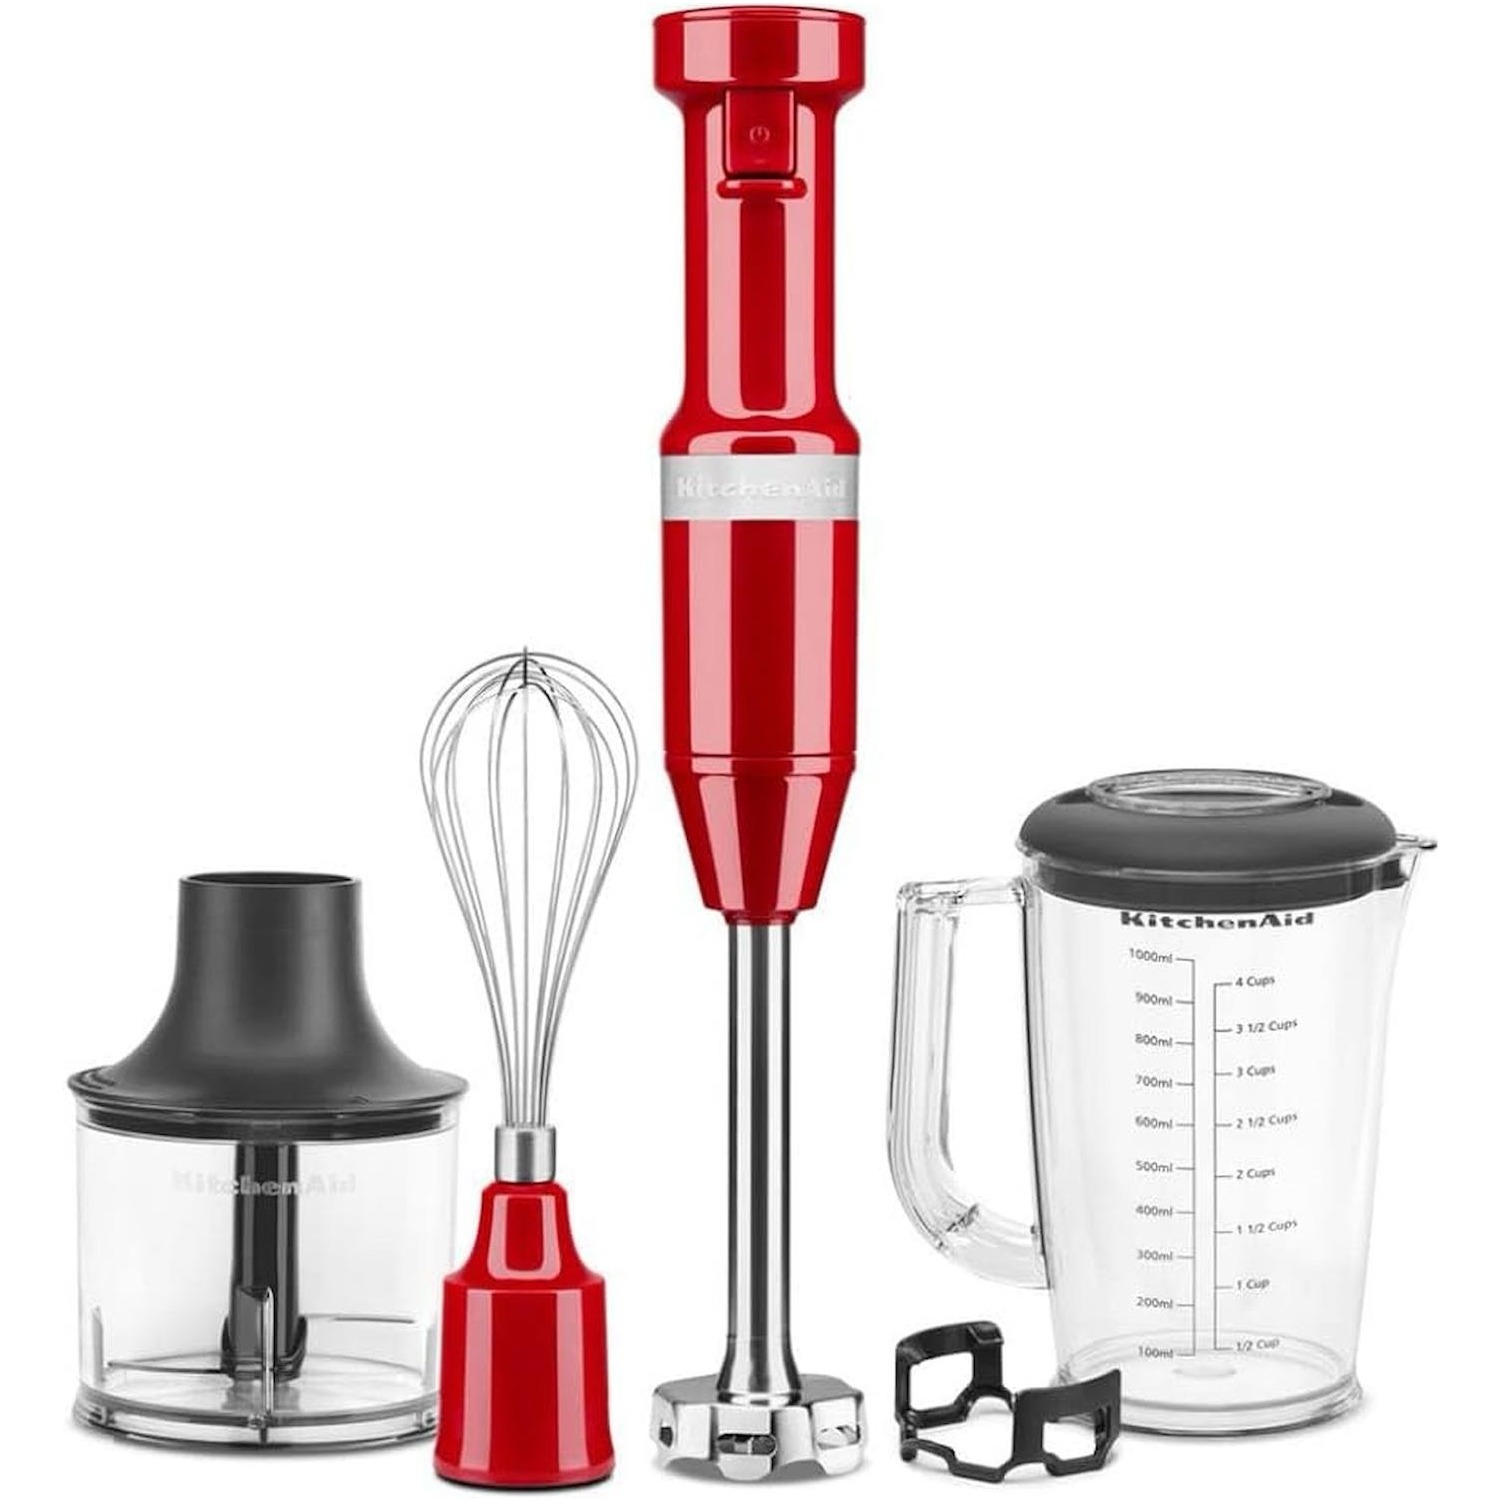 Frullatore ad immersione KitchenAid 5KHBV83EER rosso imperiale